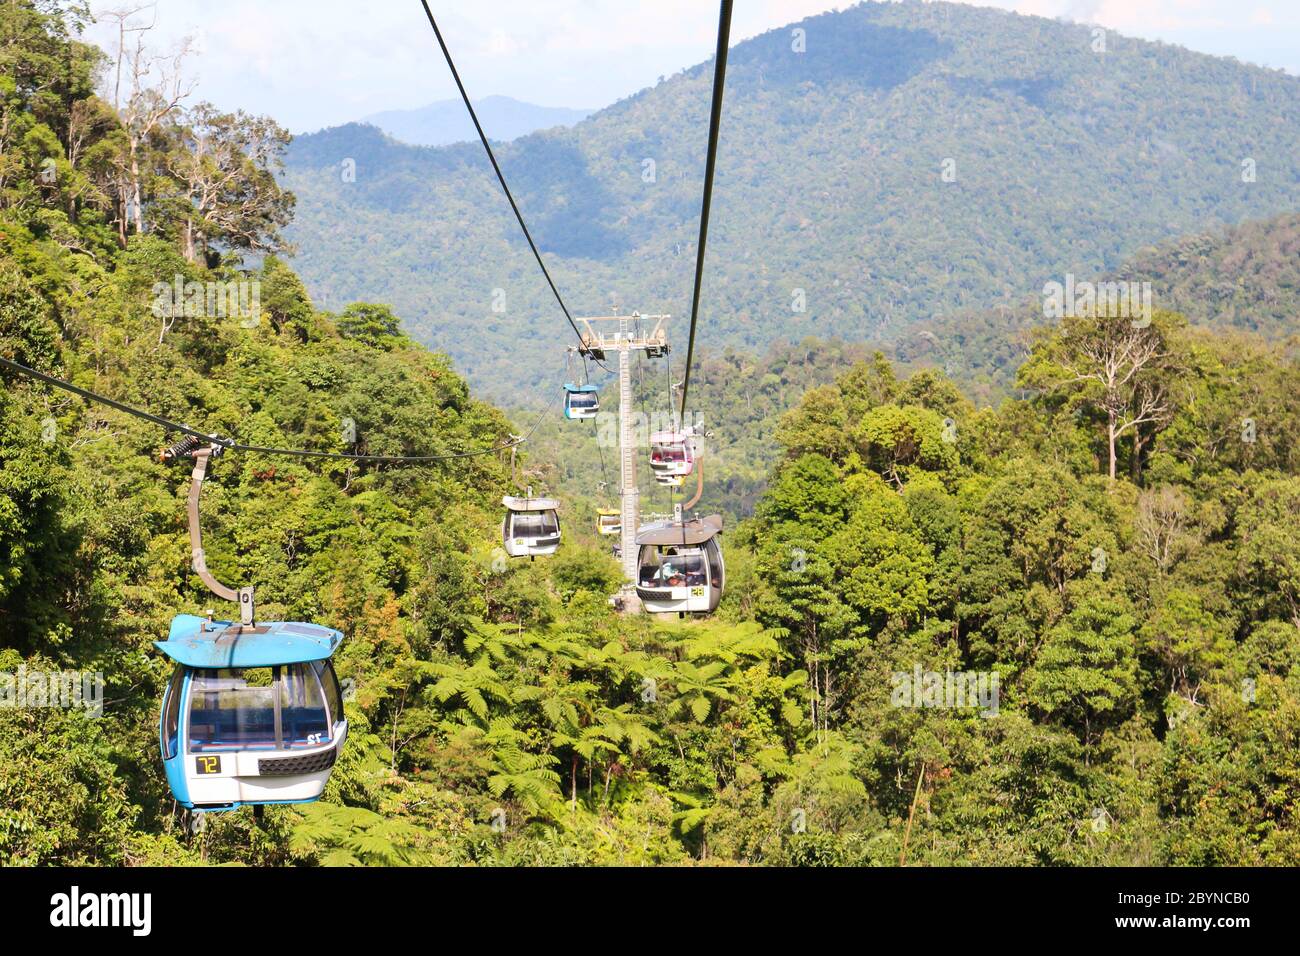 Genting Skyway Malaisie Banque D'Images